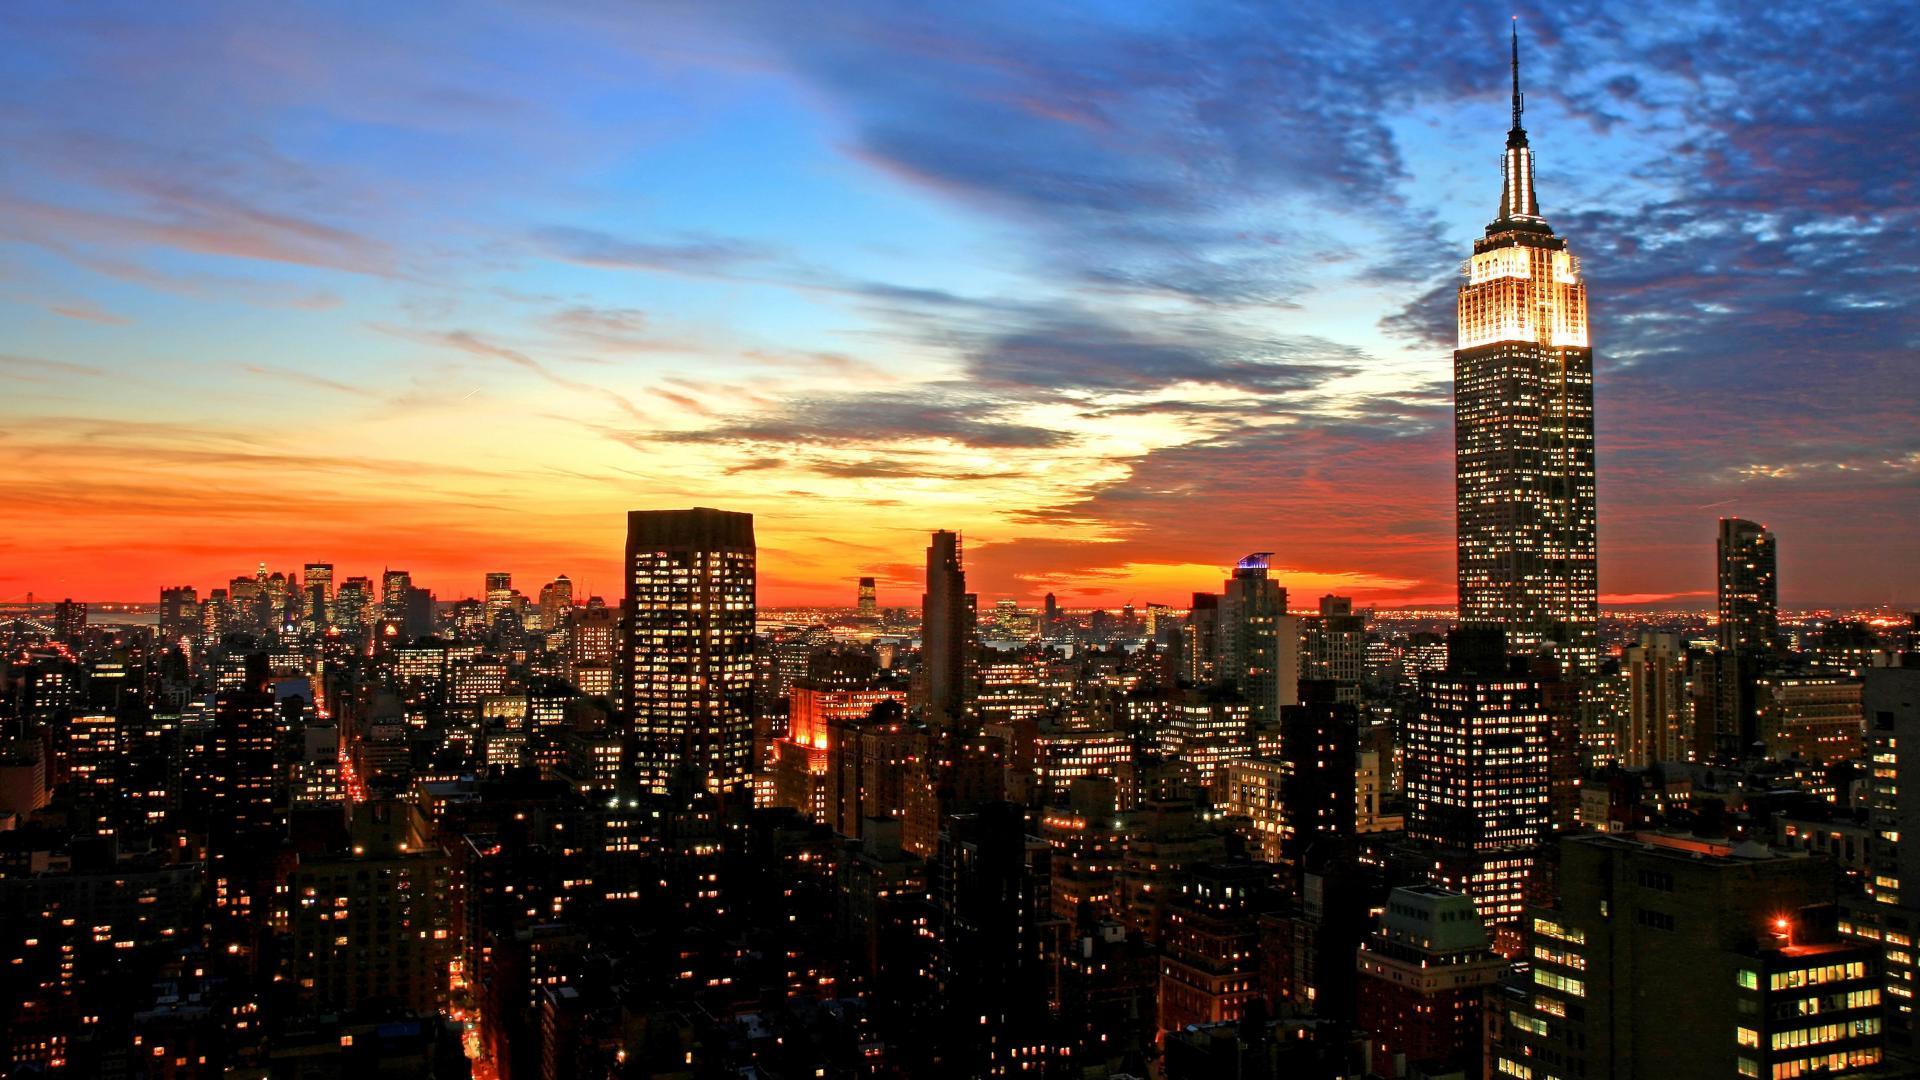 spectacular_sunset_over_nyc. Chicago Sunset. water_sunset_cityscapes_chicago_night_buildings_lakes_1920x1080_79321